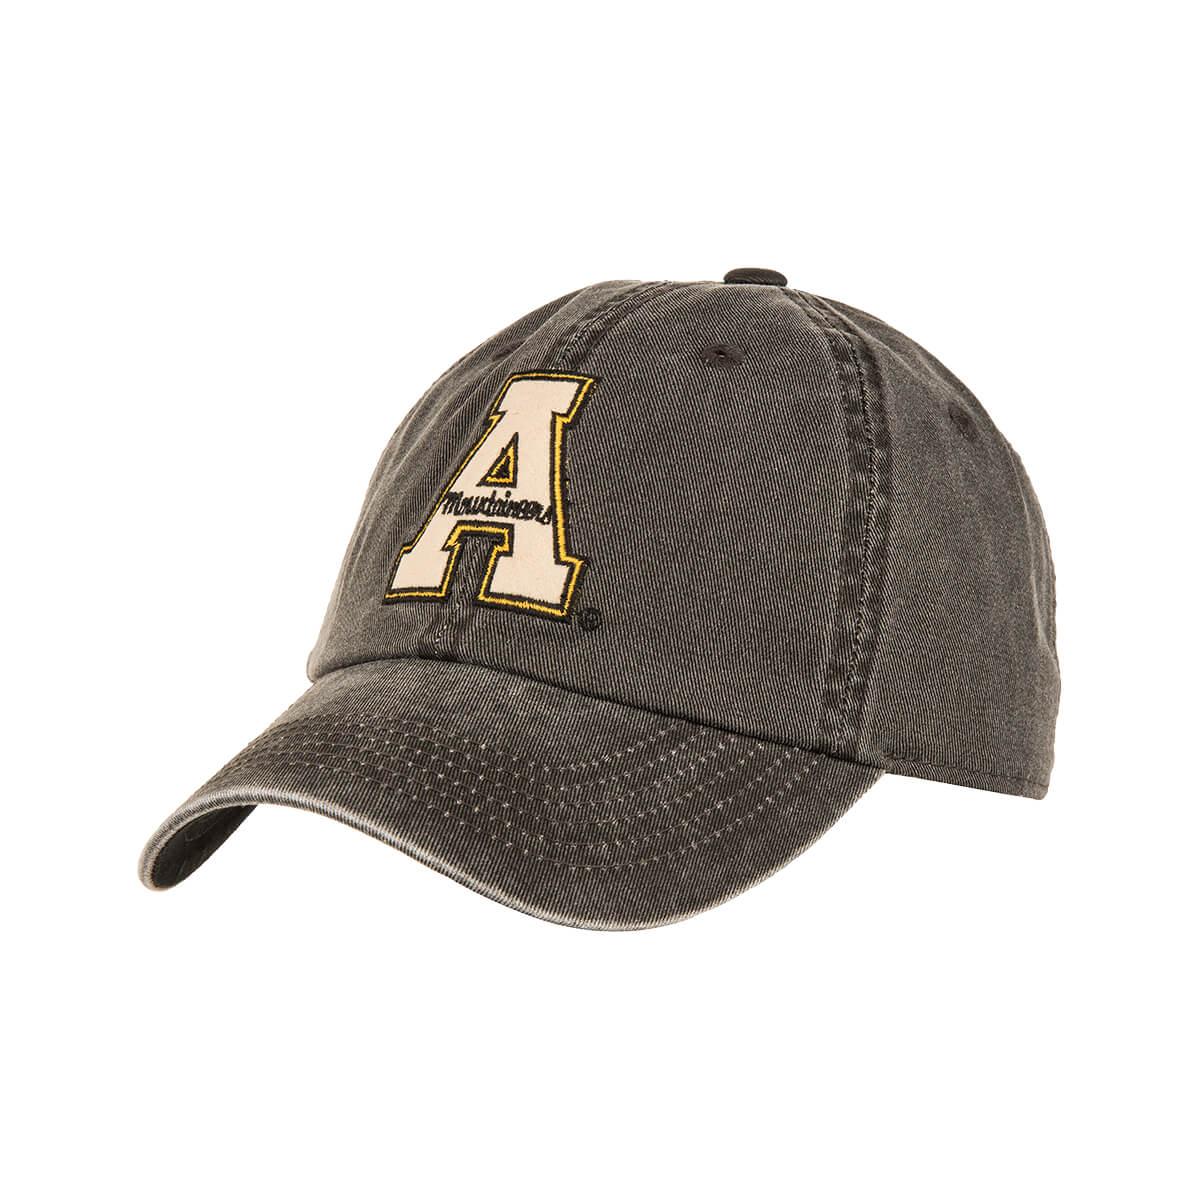 Top of the World NCAA Mens Hat Adjustable Vintage Team Icon